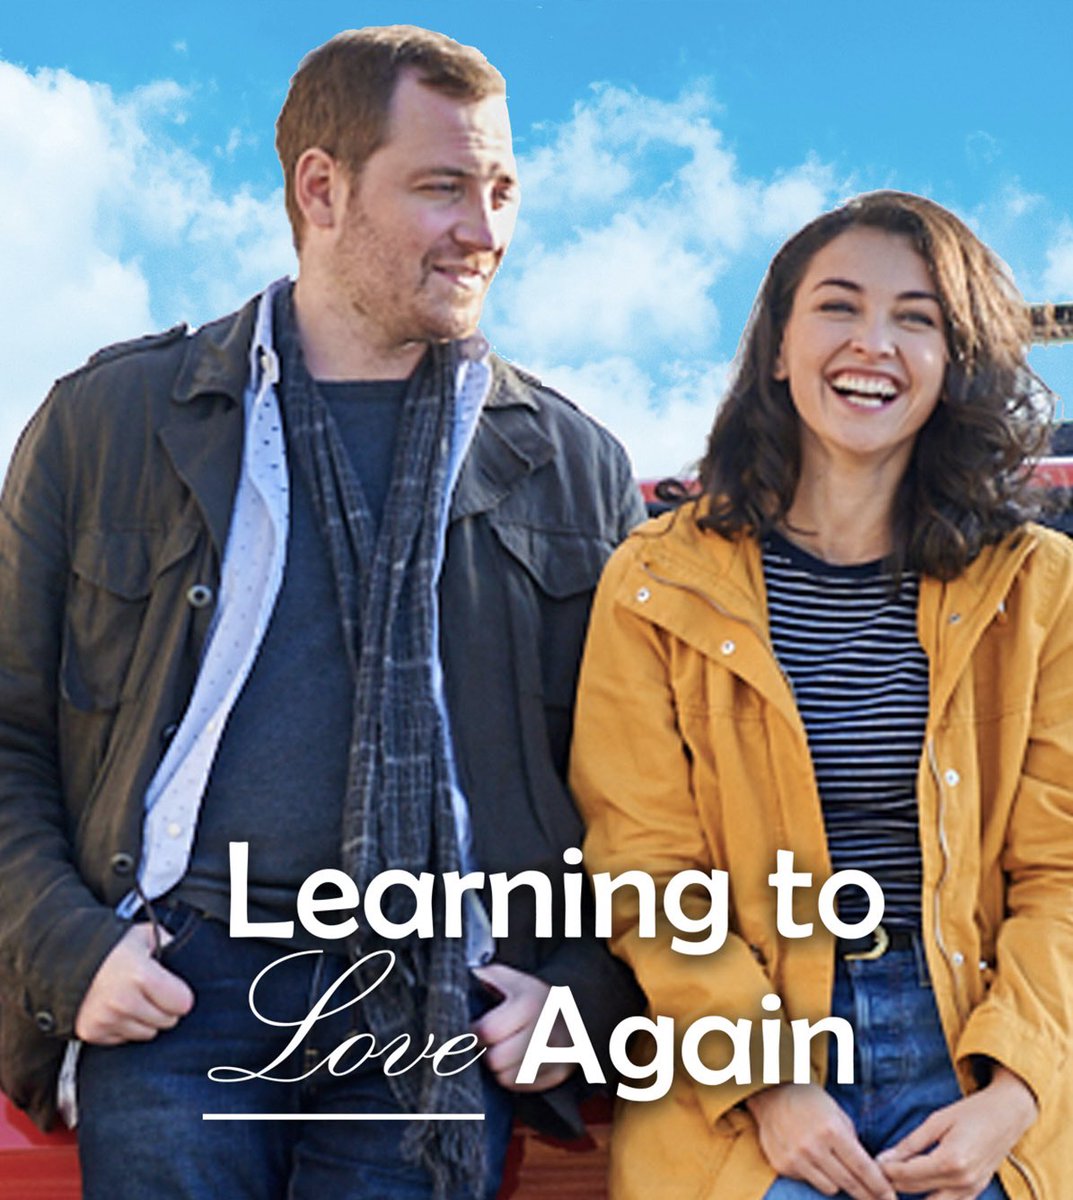 Learning to Love Again - available on #StackTV (accessible through #AmazonPrime). ♥️ 🇨🇦 After her relationship ends, Jane reluctantly heads home to the small town she grew up in. But on her way there, she stops to help a stranger who shows her how to believe in love once again.